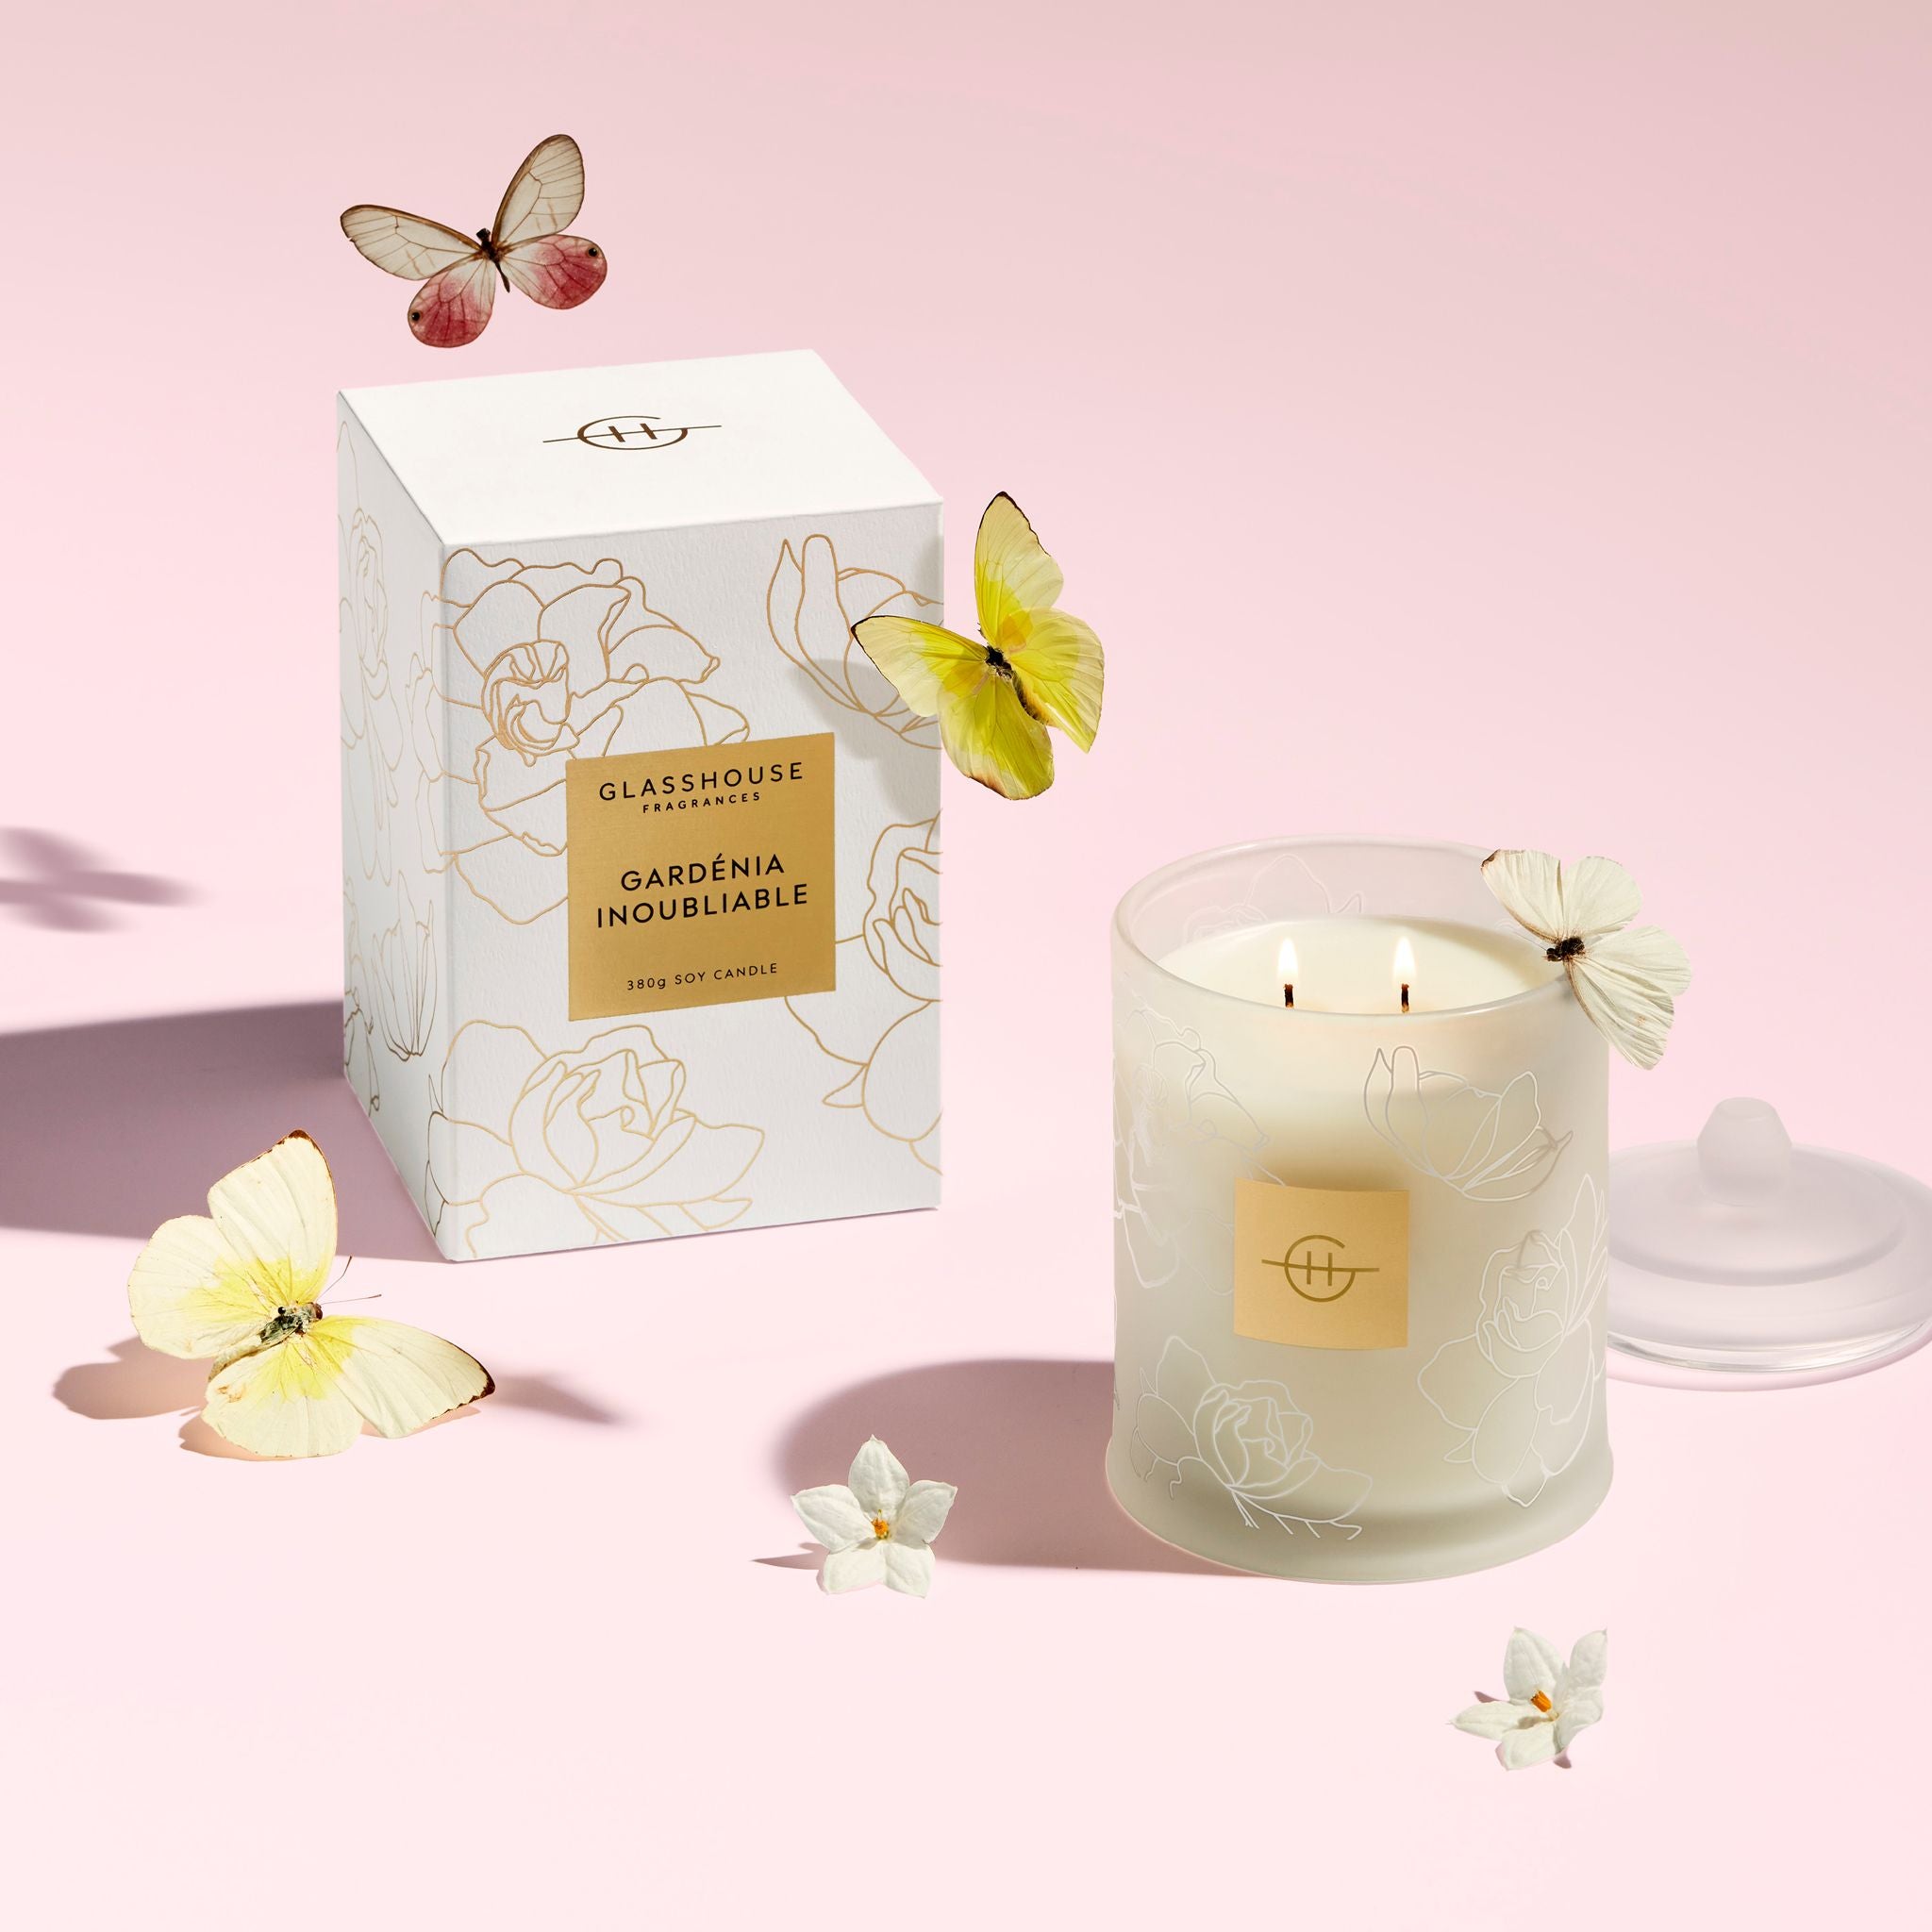 Burning Gardenia Inoubliable 380g Soy Candle next to product box with butterflies